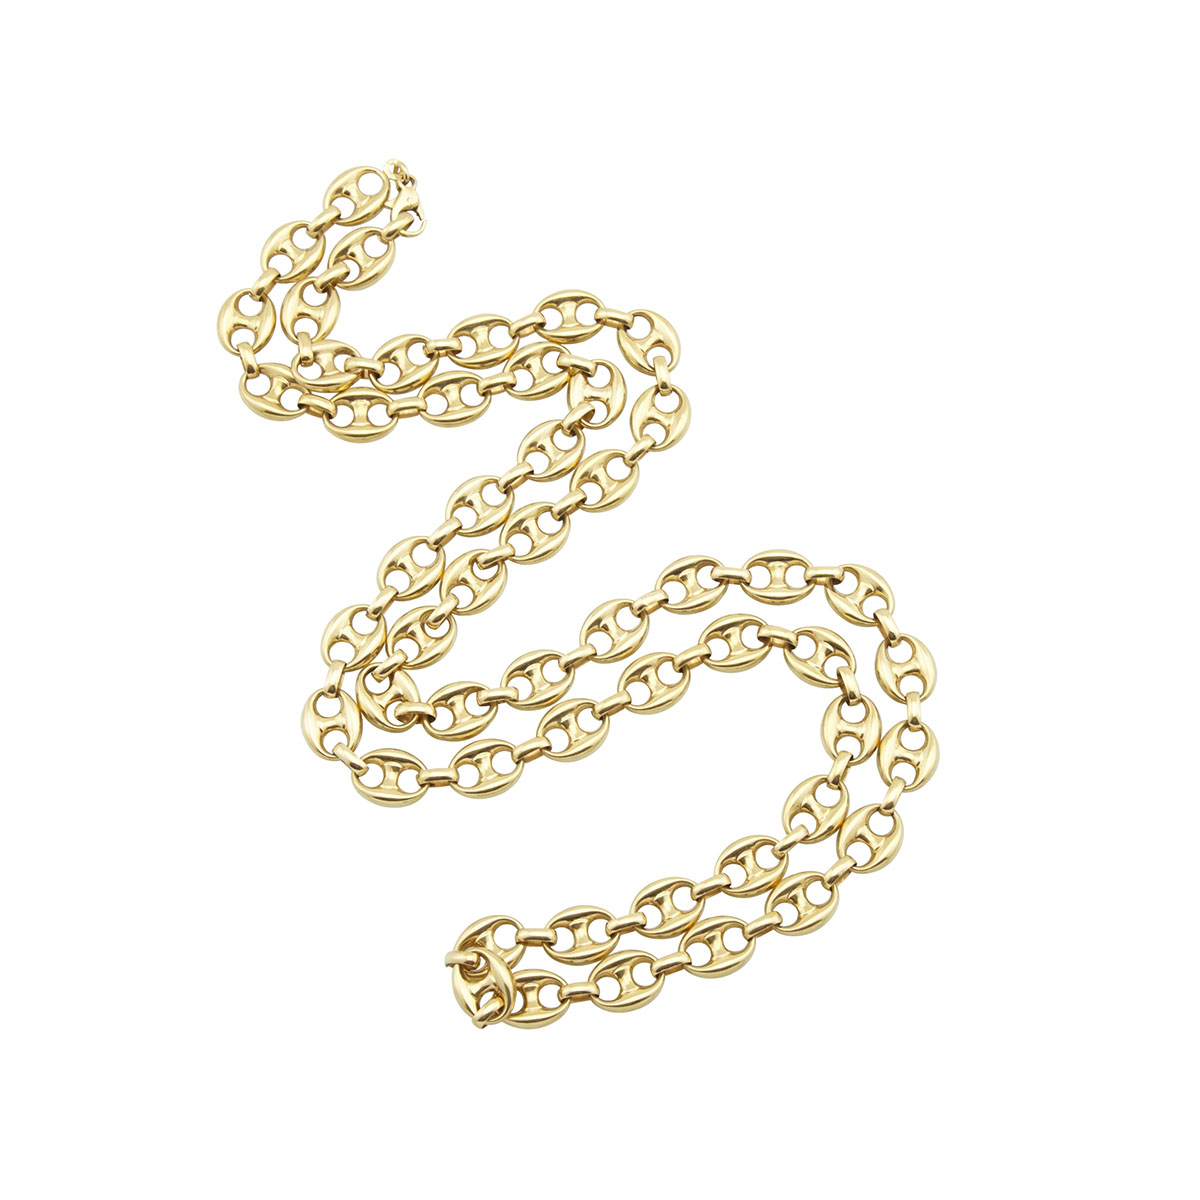 Italian 18k Yellow Gold Gucci-Style Link Chain